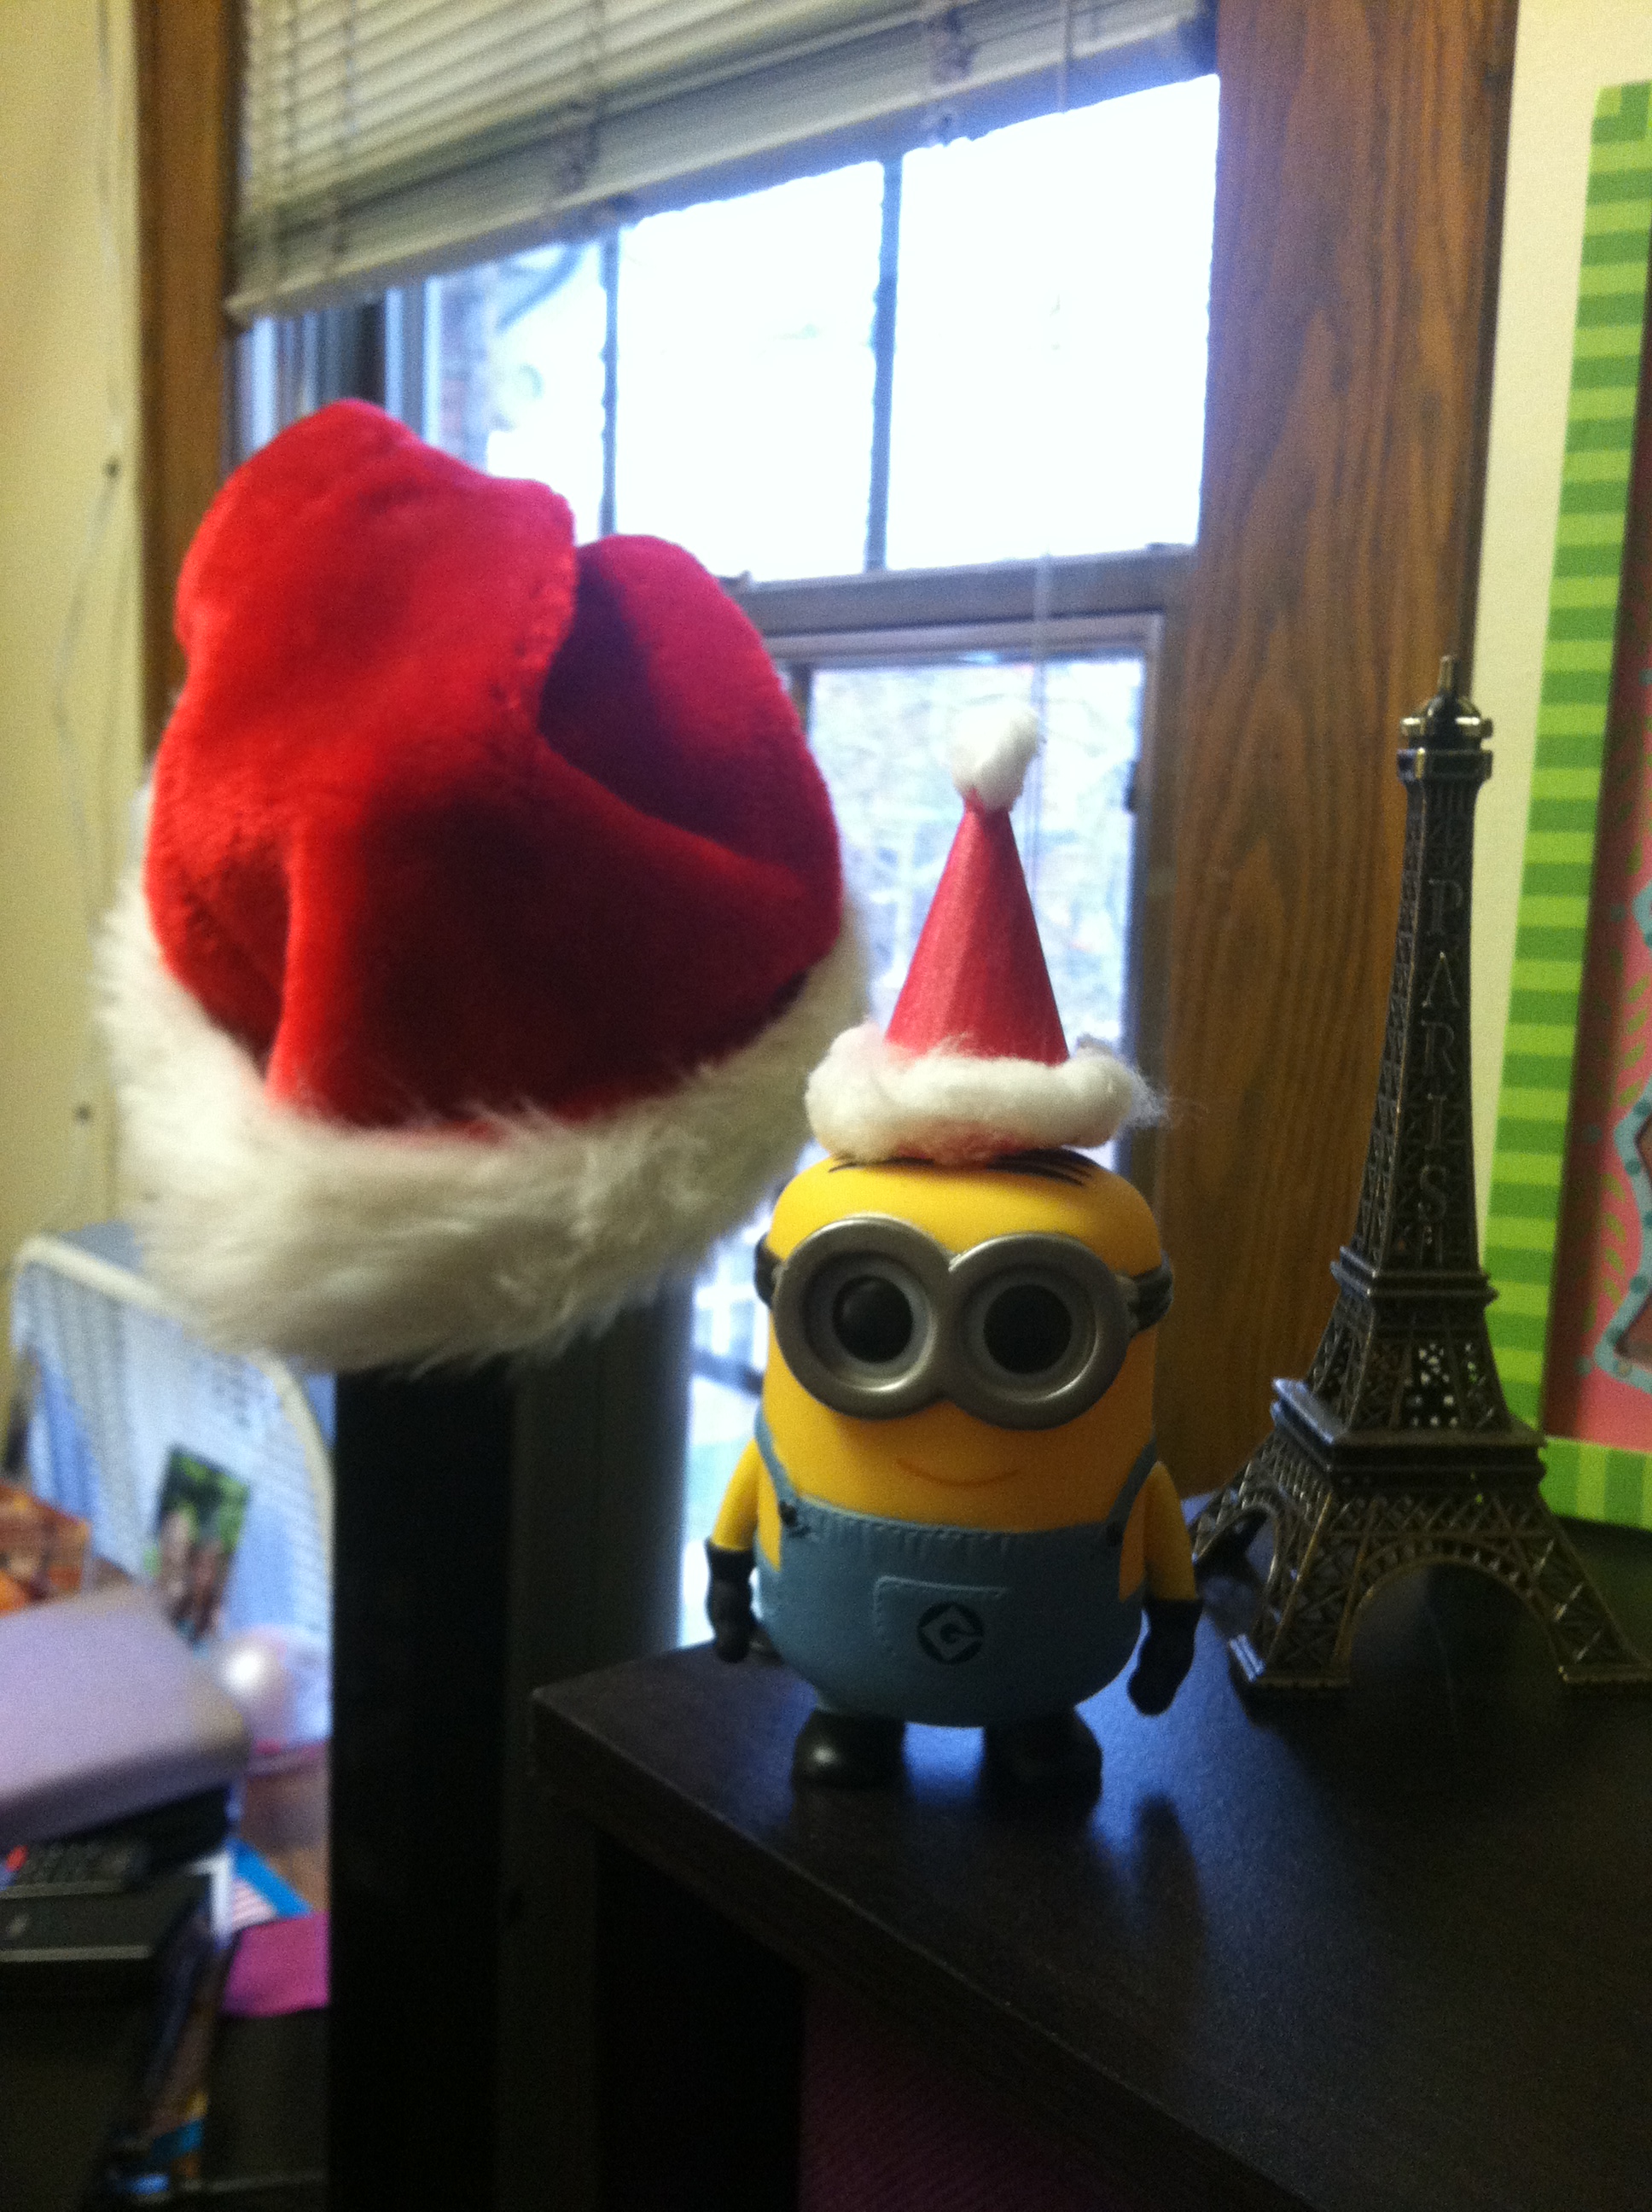 We had to get our minion and tv in the spirit of the season as well